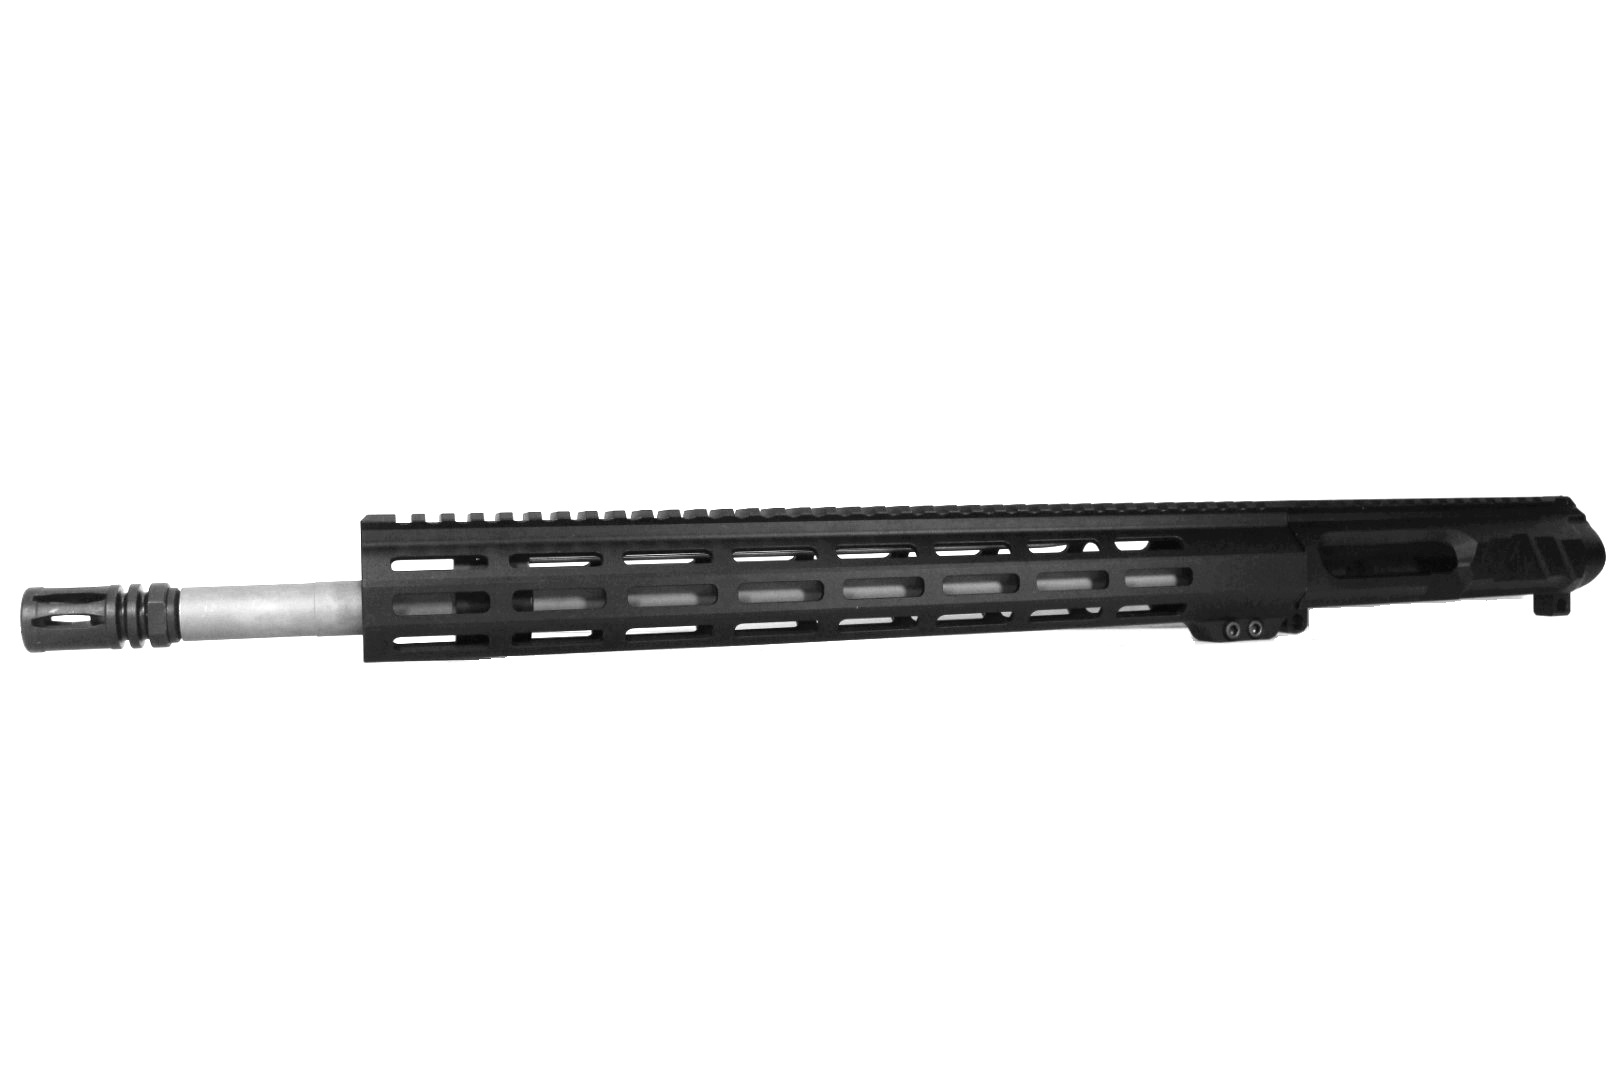 18 inch AR-15 LEFT HANDED AR-15 Non Reciprocating Side Charging 223 Wylde Stainless Premium Upper featuring a Ballistic Advantage Bead Blasted Premium Barrel